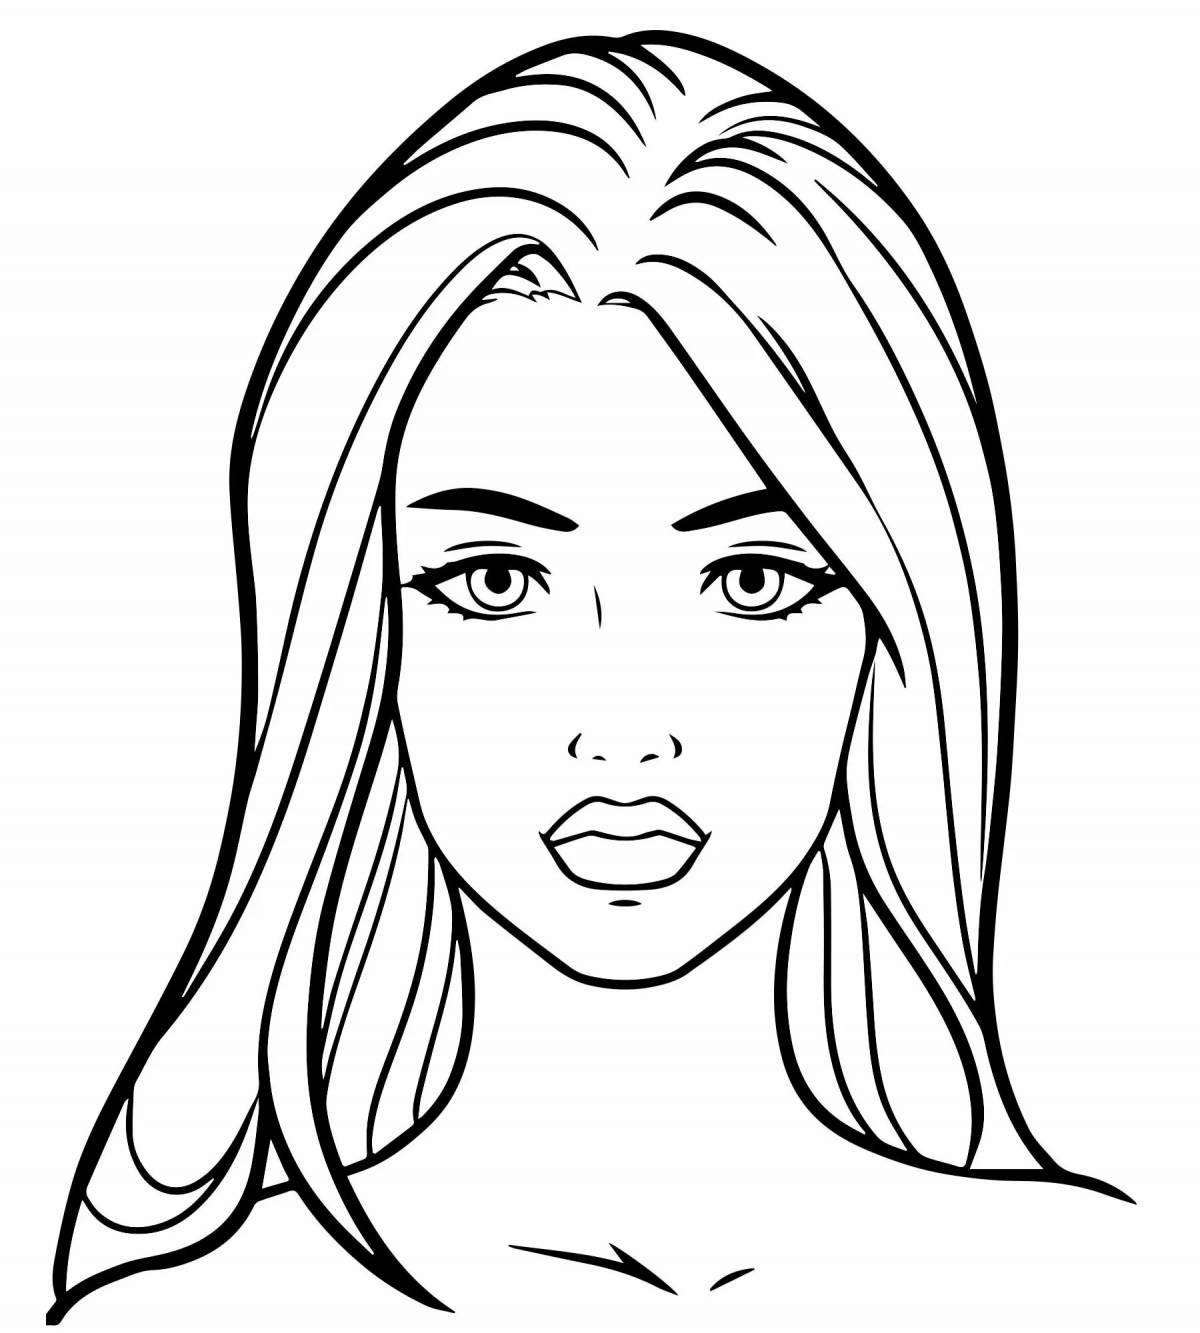 Coloring book for children with a playful female face